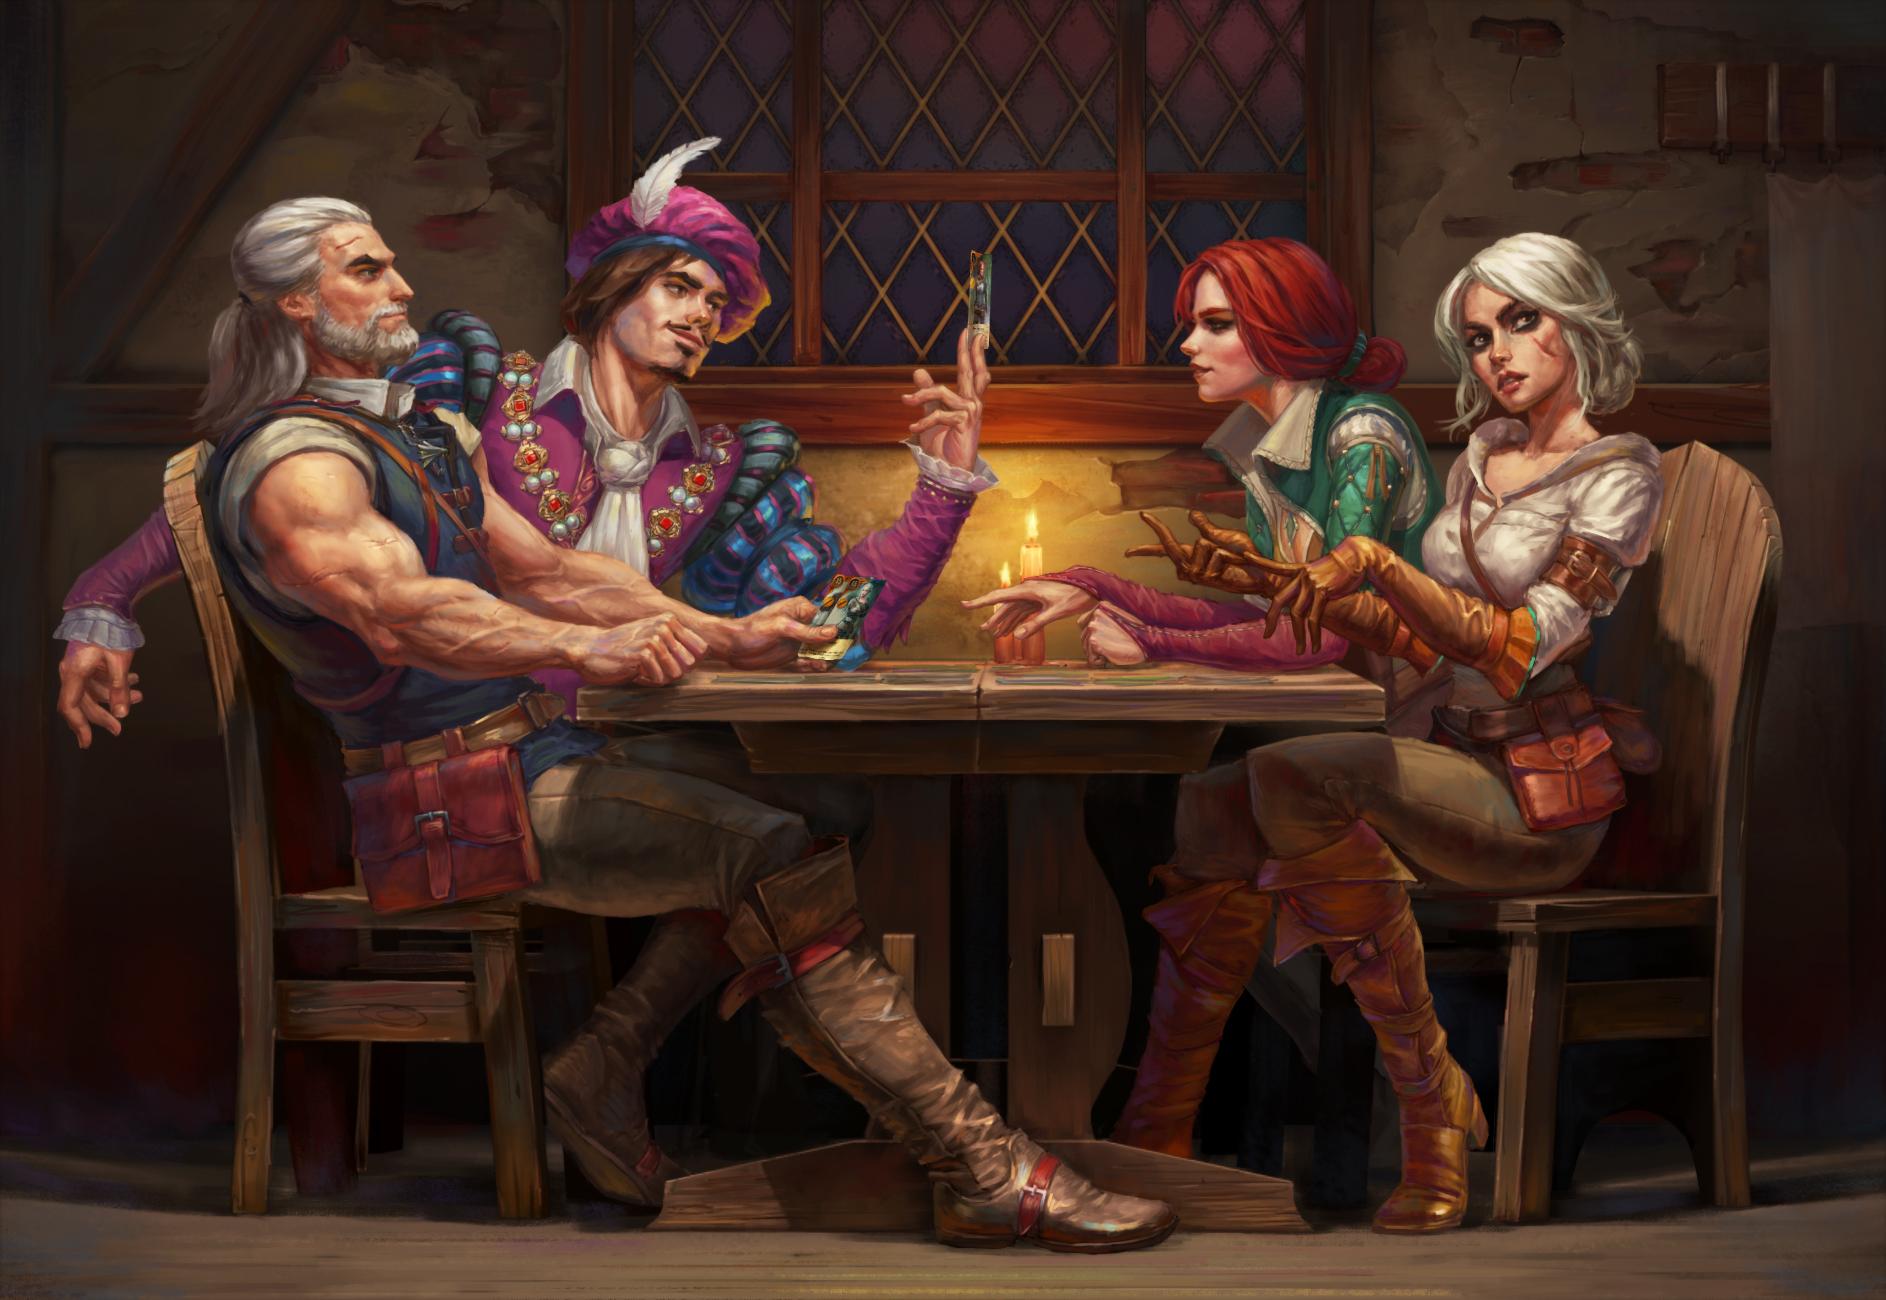 cool artwork of game characters out for some drinks